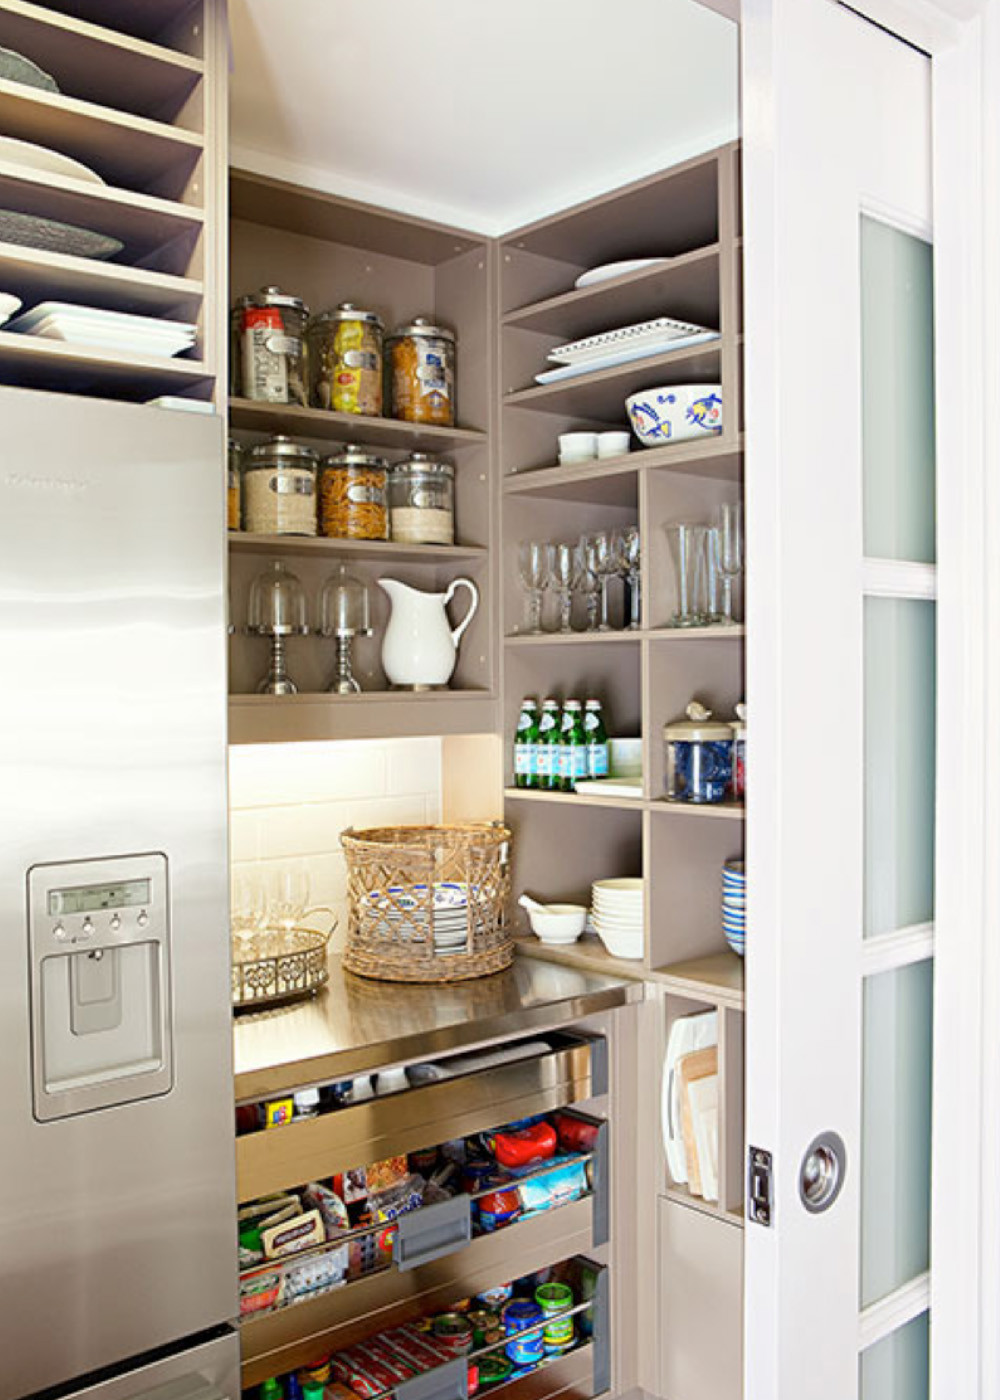 Kitchen Pantry Design Ideas
 How to design the perfect butler s pantry Homes